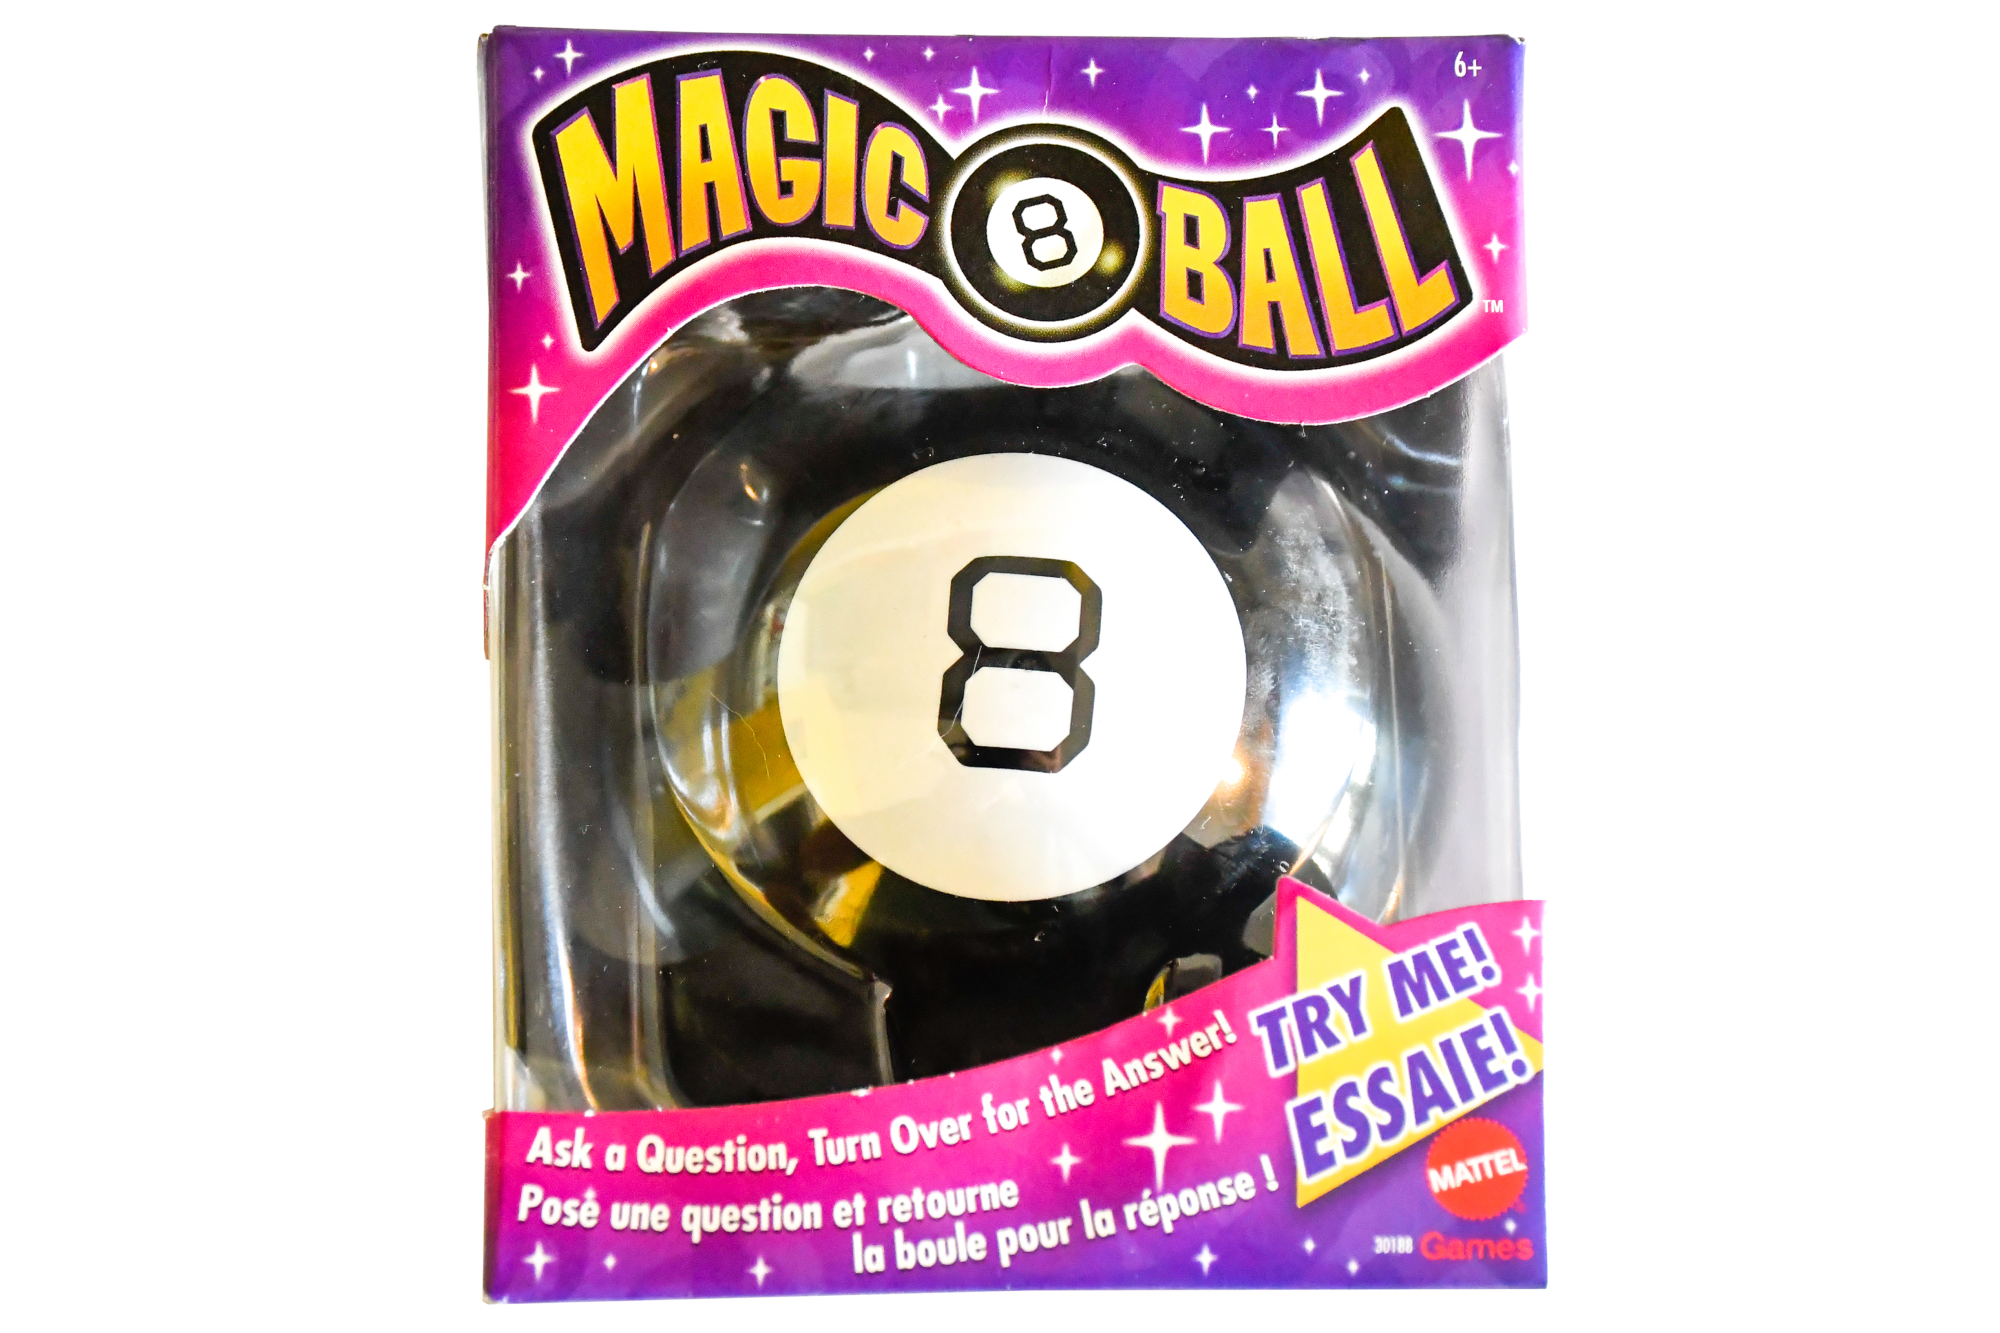 Magic 8 Ball in its pink and purple packaging